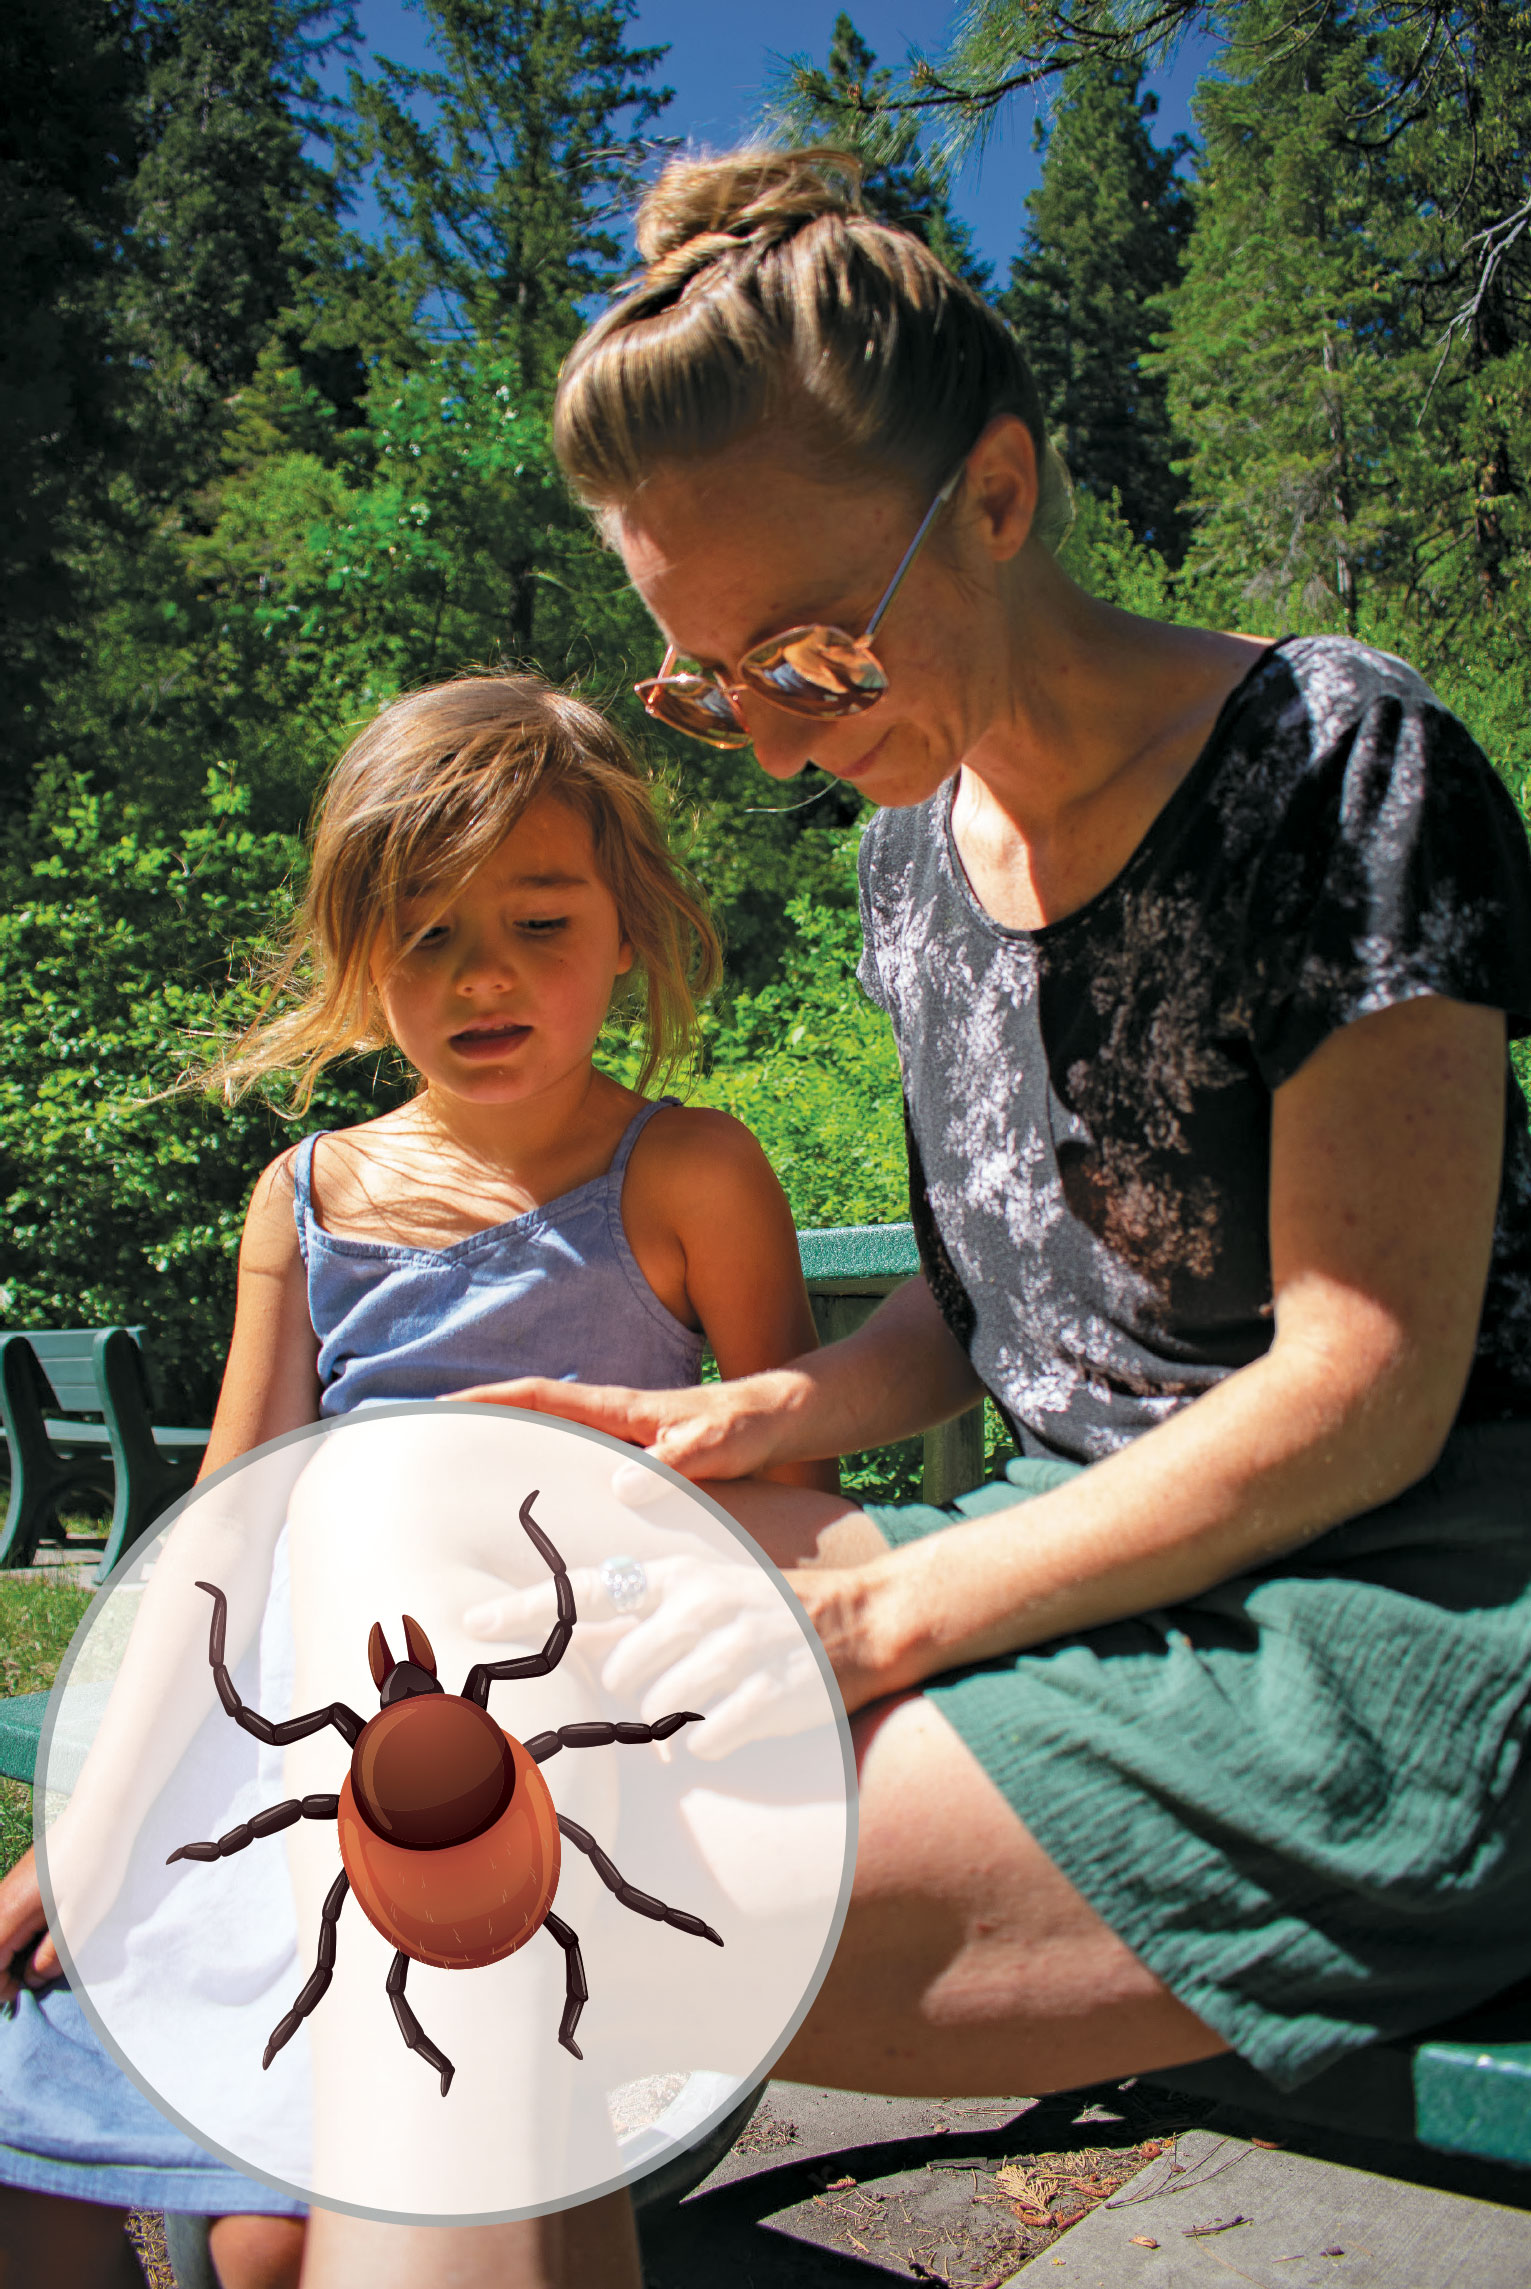 Tick Bites Can Be Serious - Know The Symptoms and Take Action - North ...